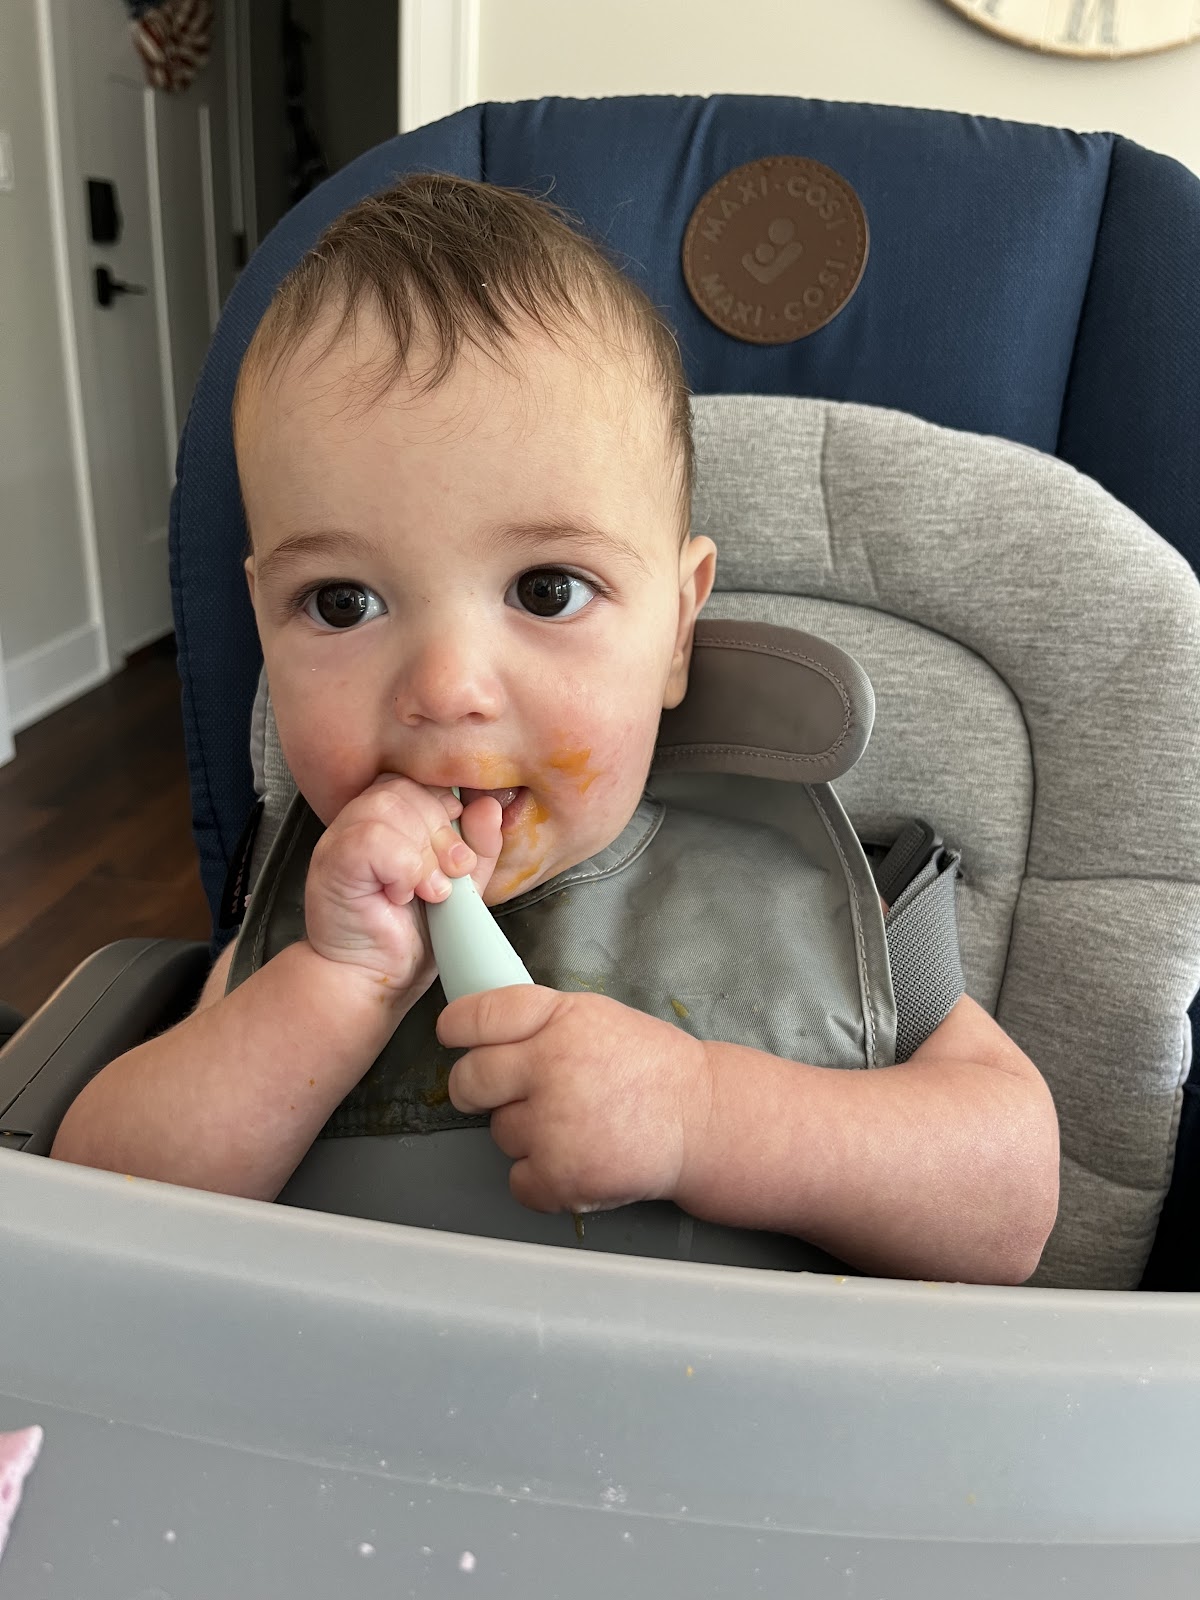 supervised eating activities for 5-month-old